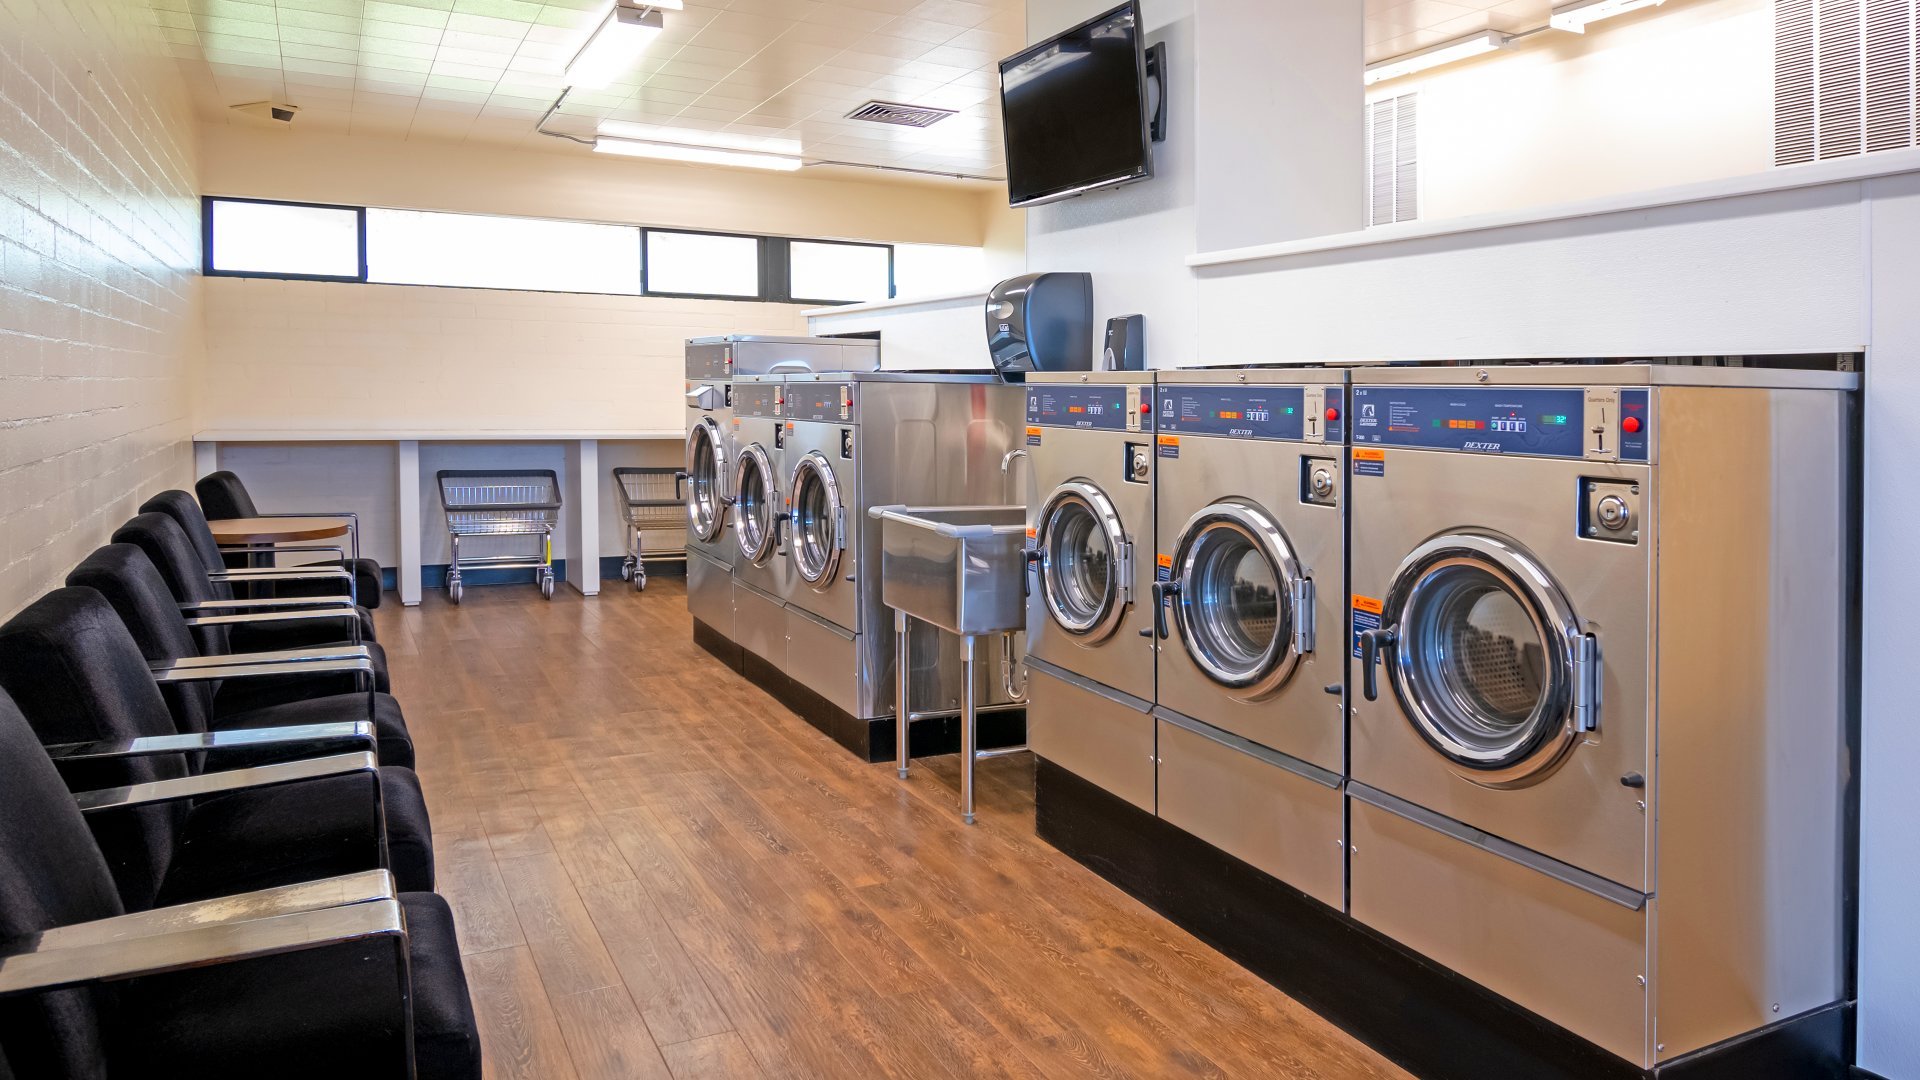 RV-Park-Laundry-Room-viw-of-seating-area-and-washing-machines_q085_1920x1080